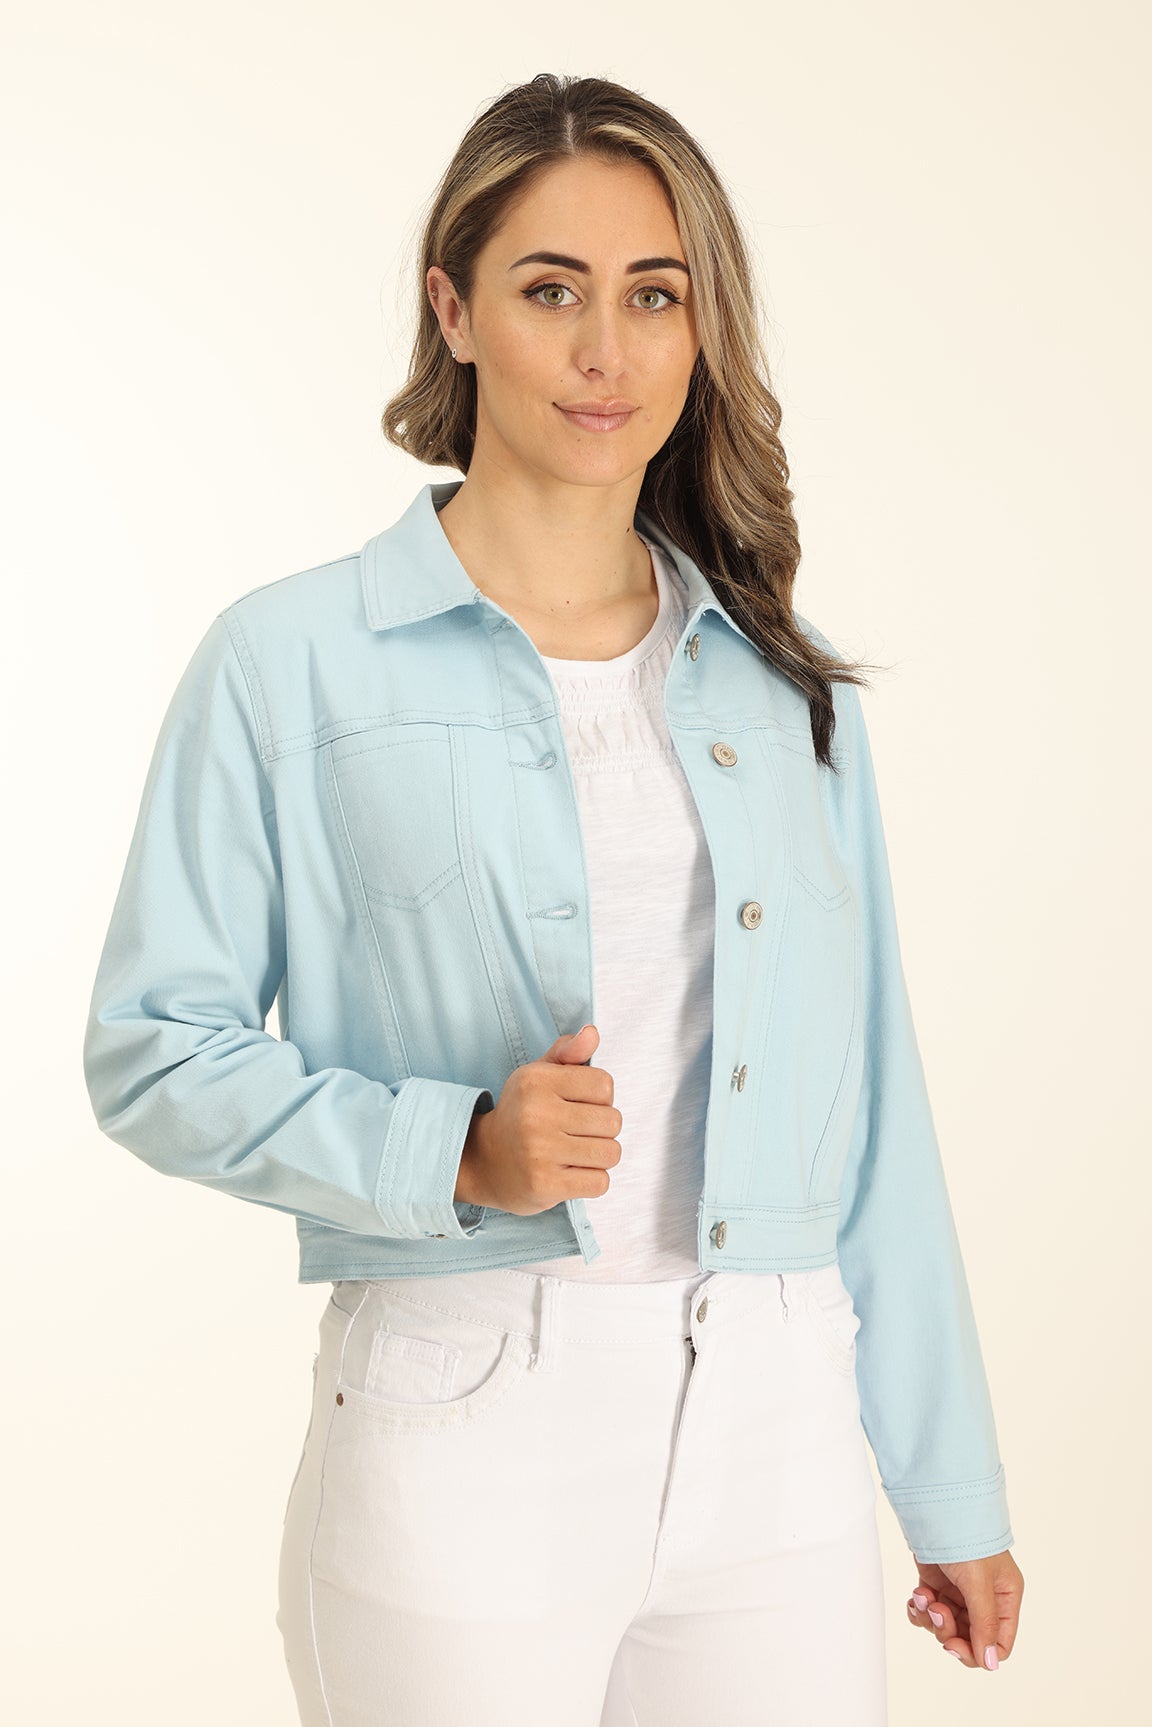 Buy HAPPENING Plus Size Women Regular Fit Soft Denim Waist Length Jacket -  Faded Light Blue Color - Non Stretch Fabric- Bust Size (XL) 42 / (2XL) 44 /  (3XL) 46 / (4XL) 48 / (5XL) 50 inches (XL) at Amazon.in